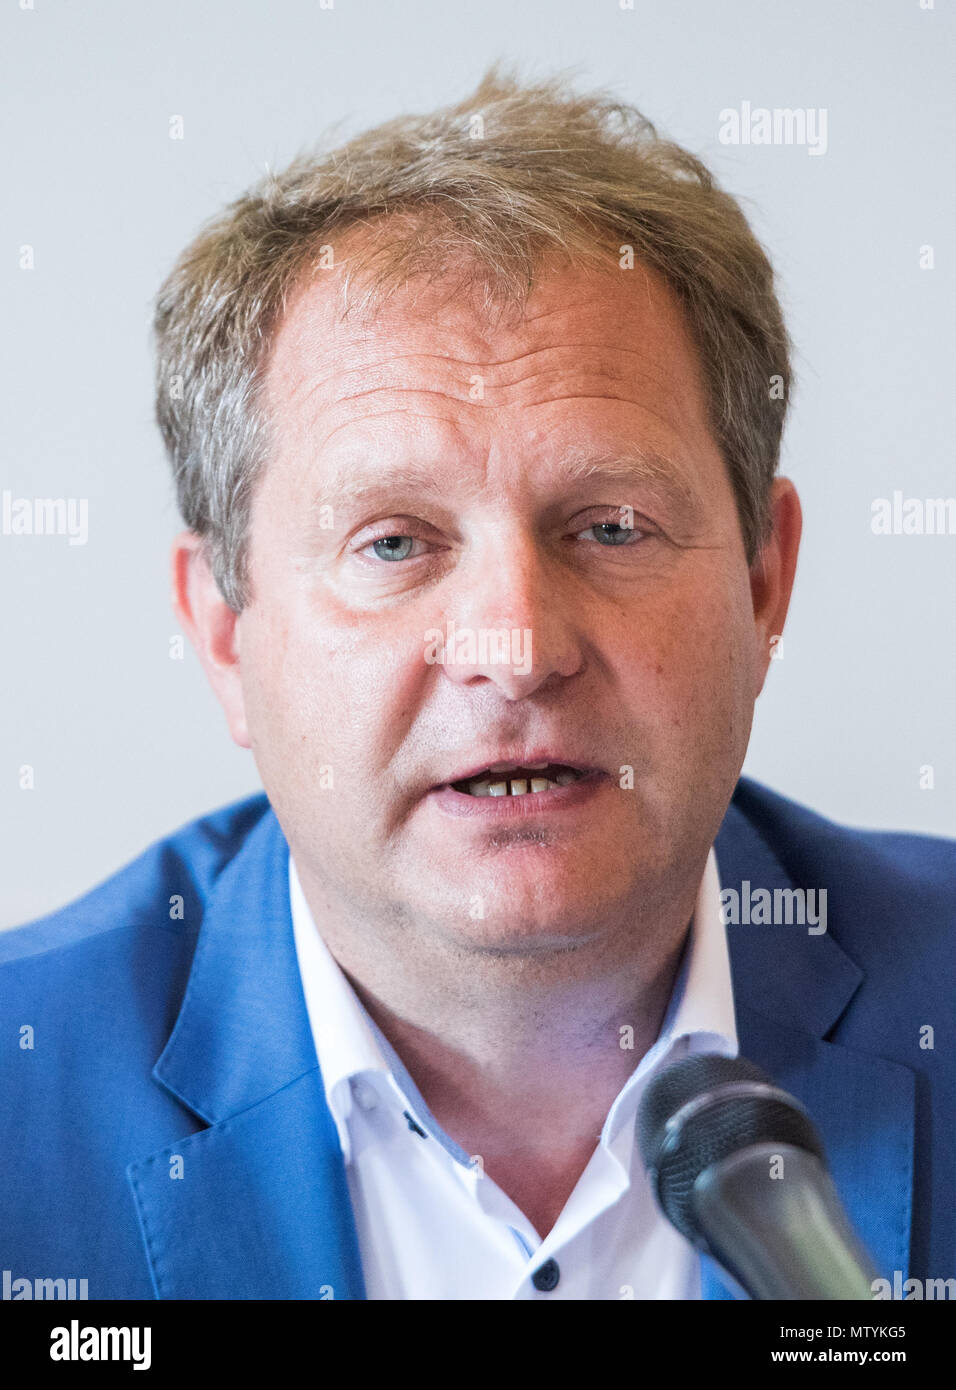 31 May 2018, Germany, Hamburg: Environment senator for Hamburg from the Green party, Jens Kerstan, speaking at press conference about the ban on diesel vehicles in Hamburg. Due to polluted air, a ban on certain streets in Hamburg is, as of today, in place. Photo: Daniel Bockwoldt/dpa Stock Photo